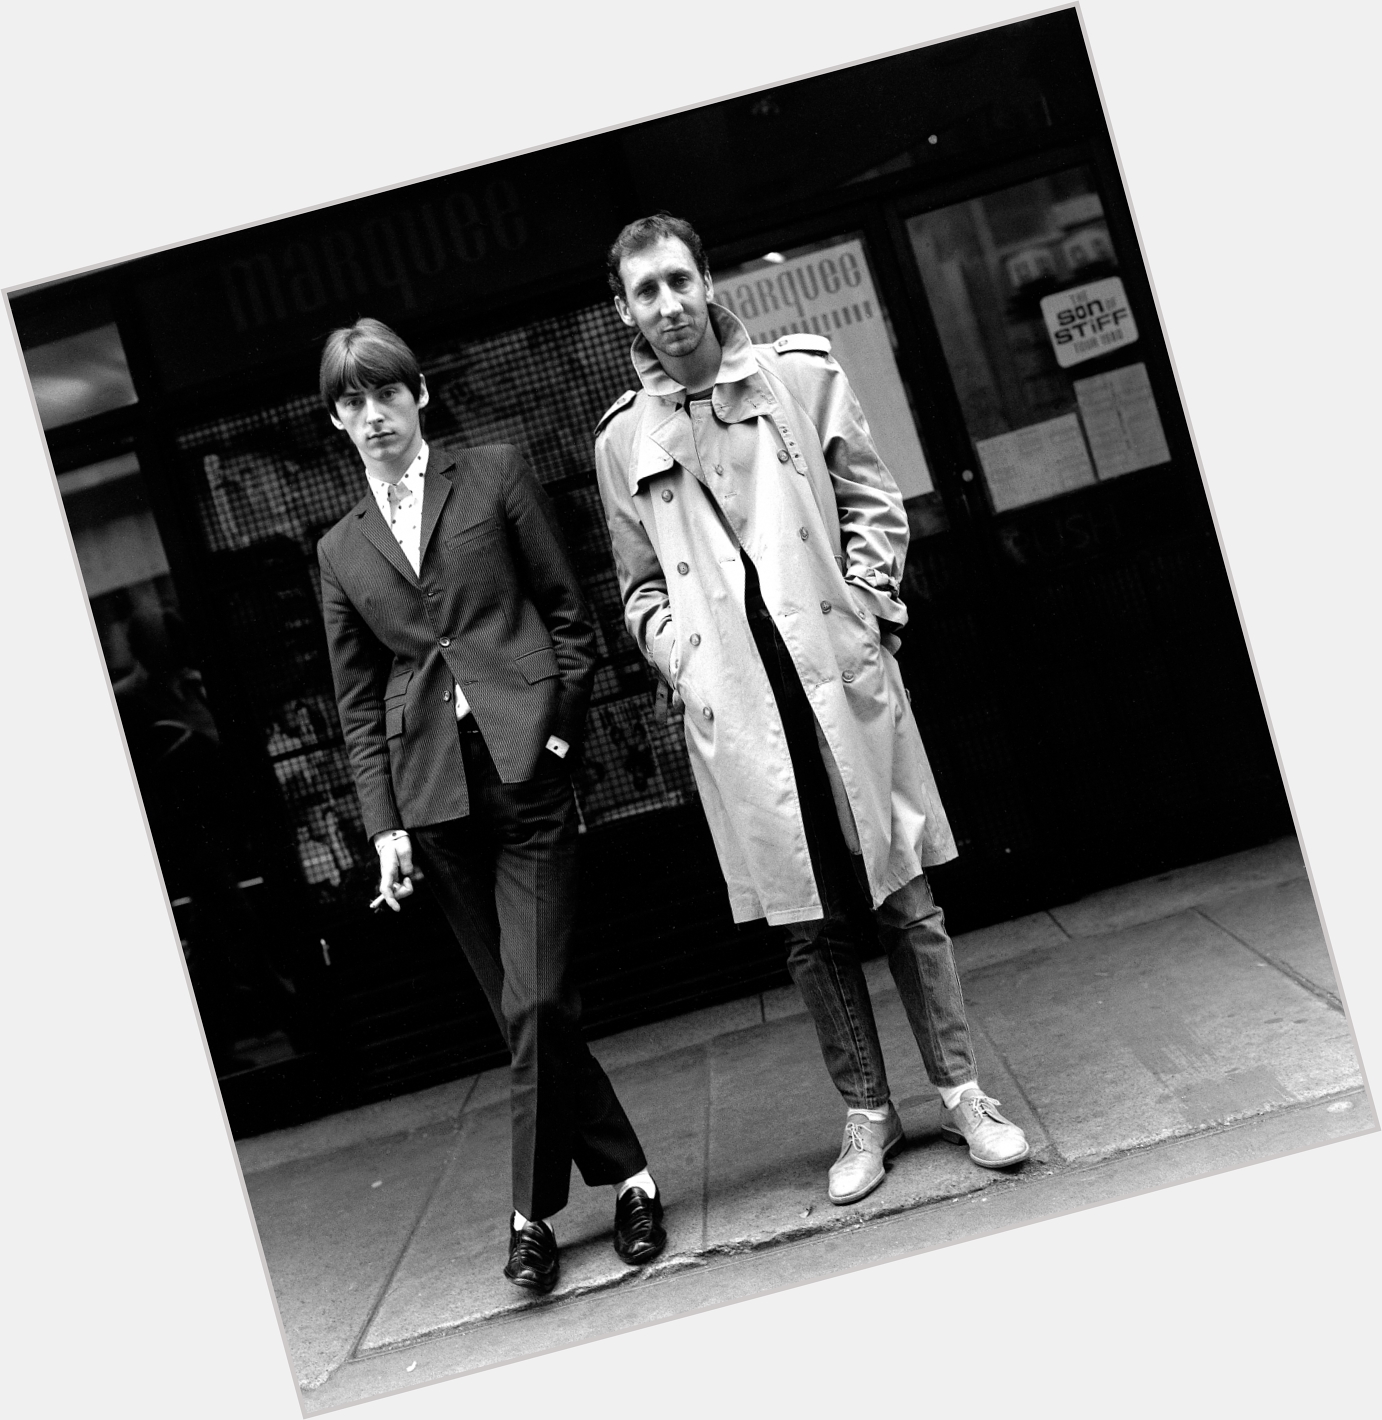 Happy birthday Pete Townshend!  With Paul Weller in a great shot by Janette Beckman
Soho, 1980 